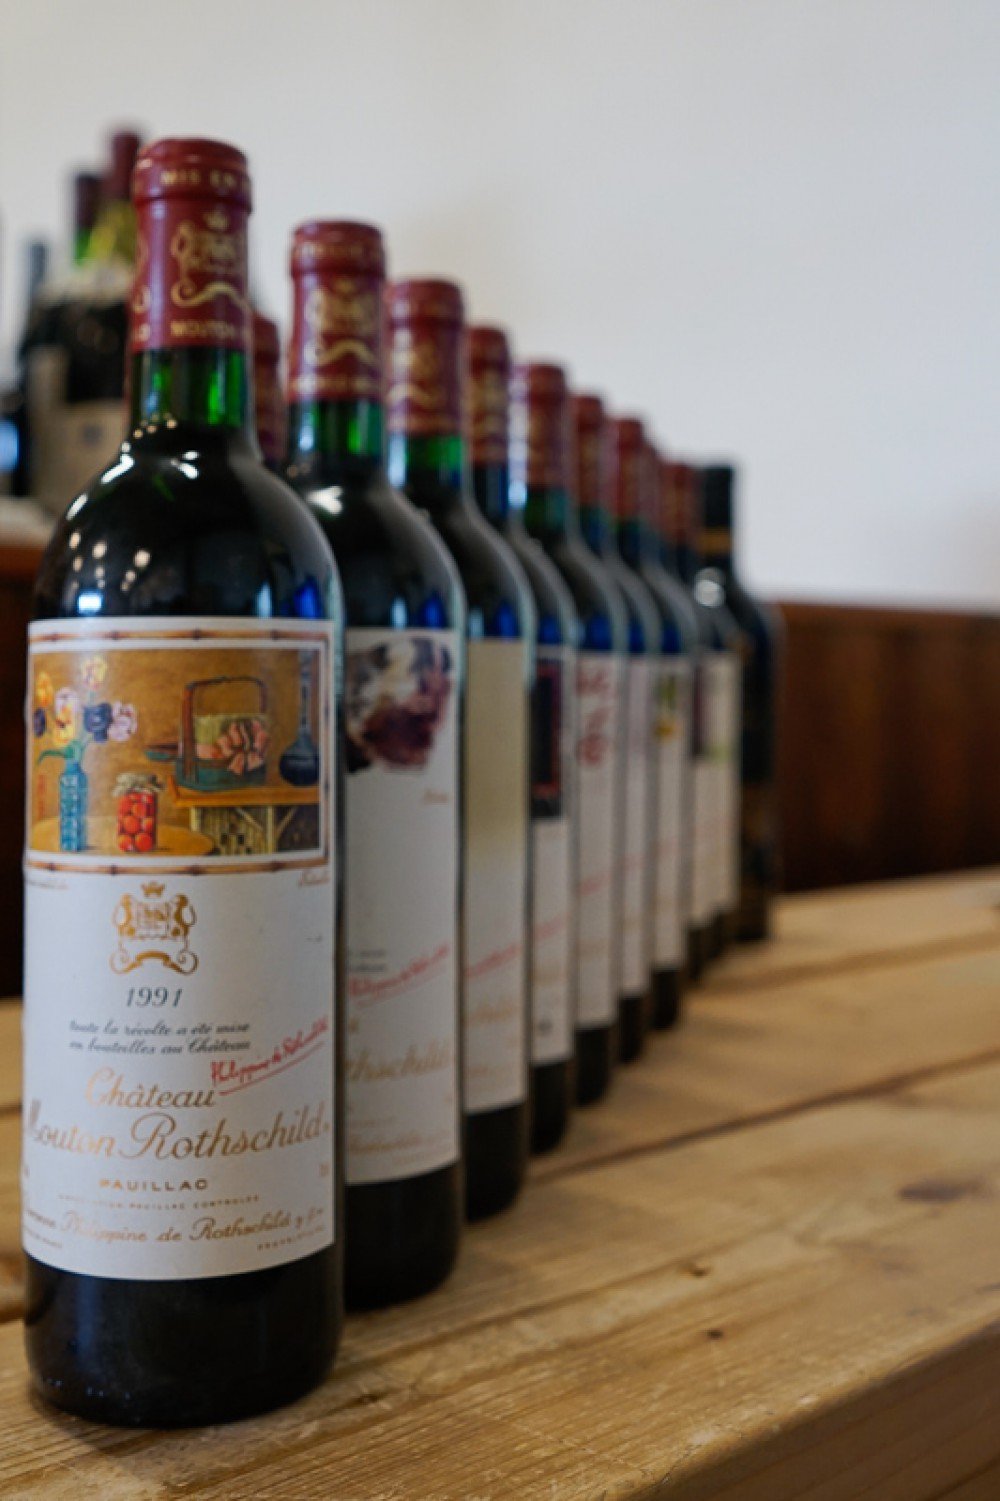 Mouton Rothschild collection